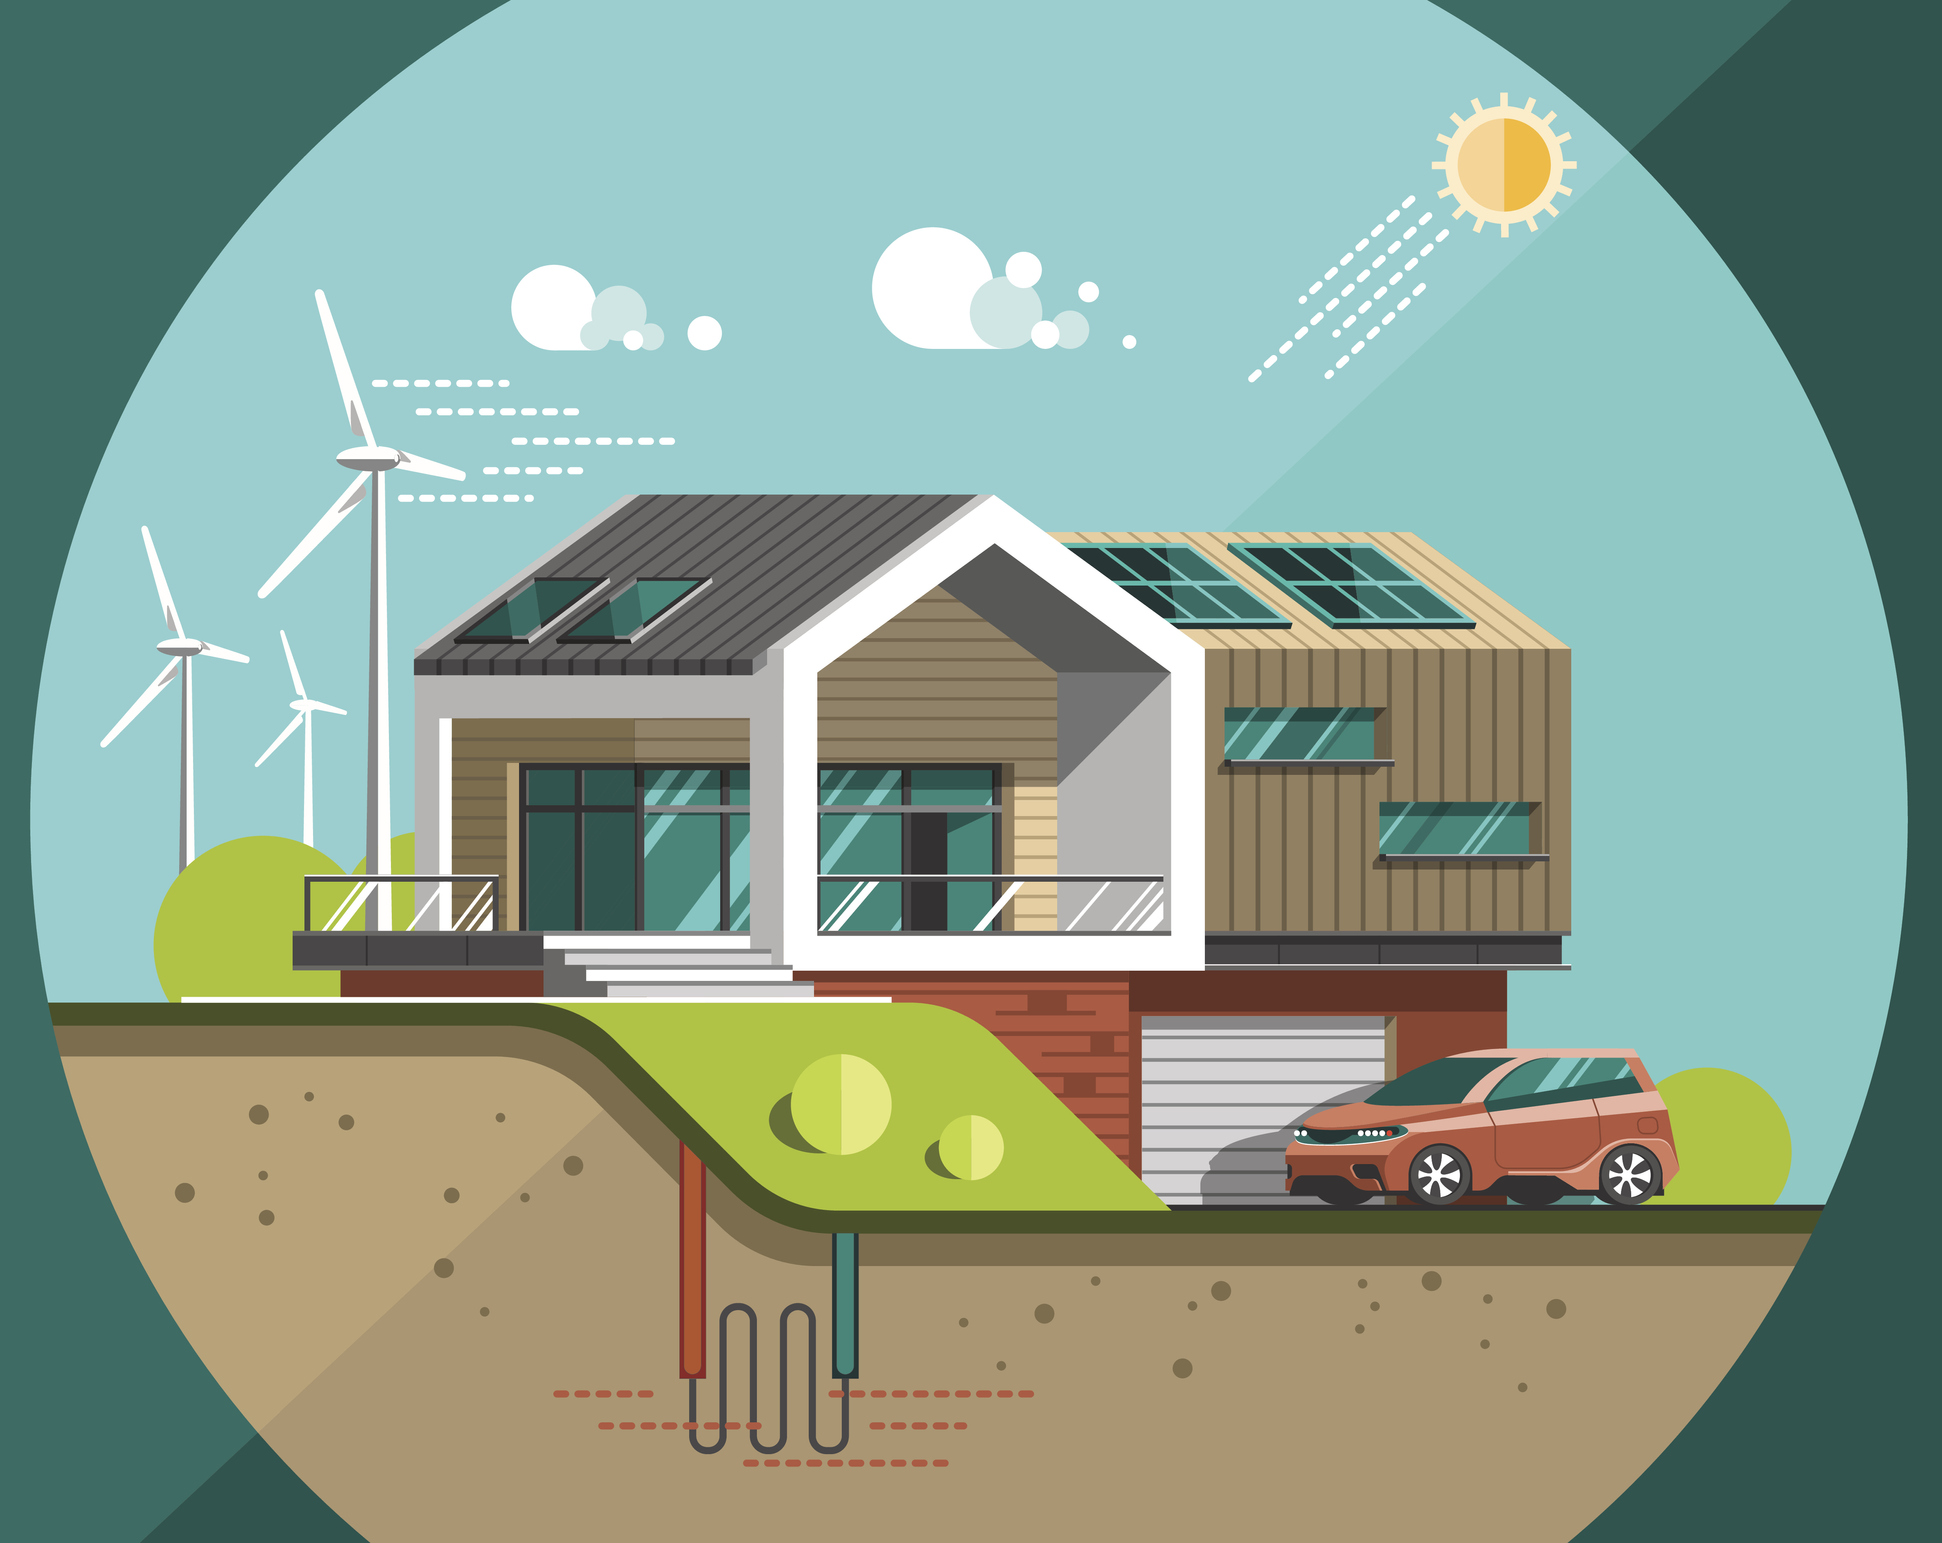 Infographic depicting a home powered by solar energy and other renewable sources